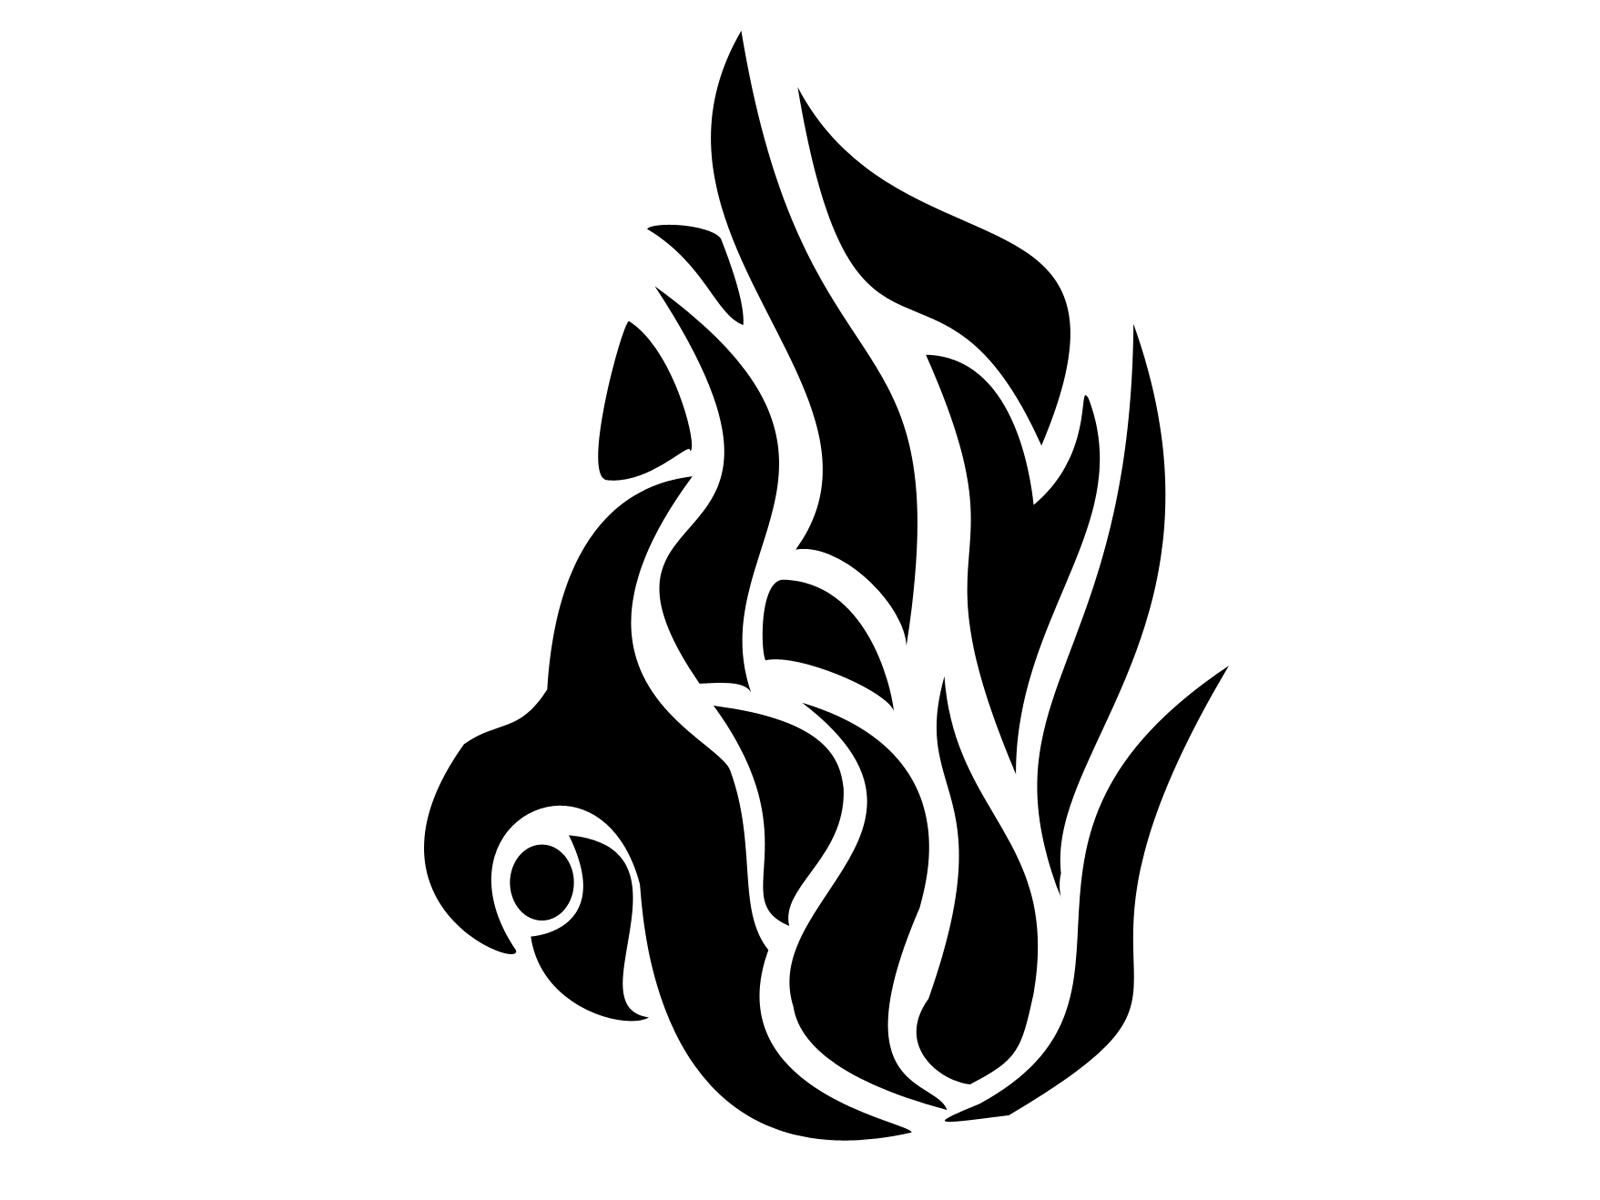 Tribal flame symbol image template Royalty Free Vector Image